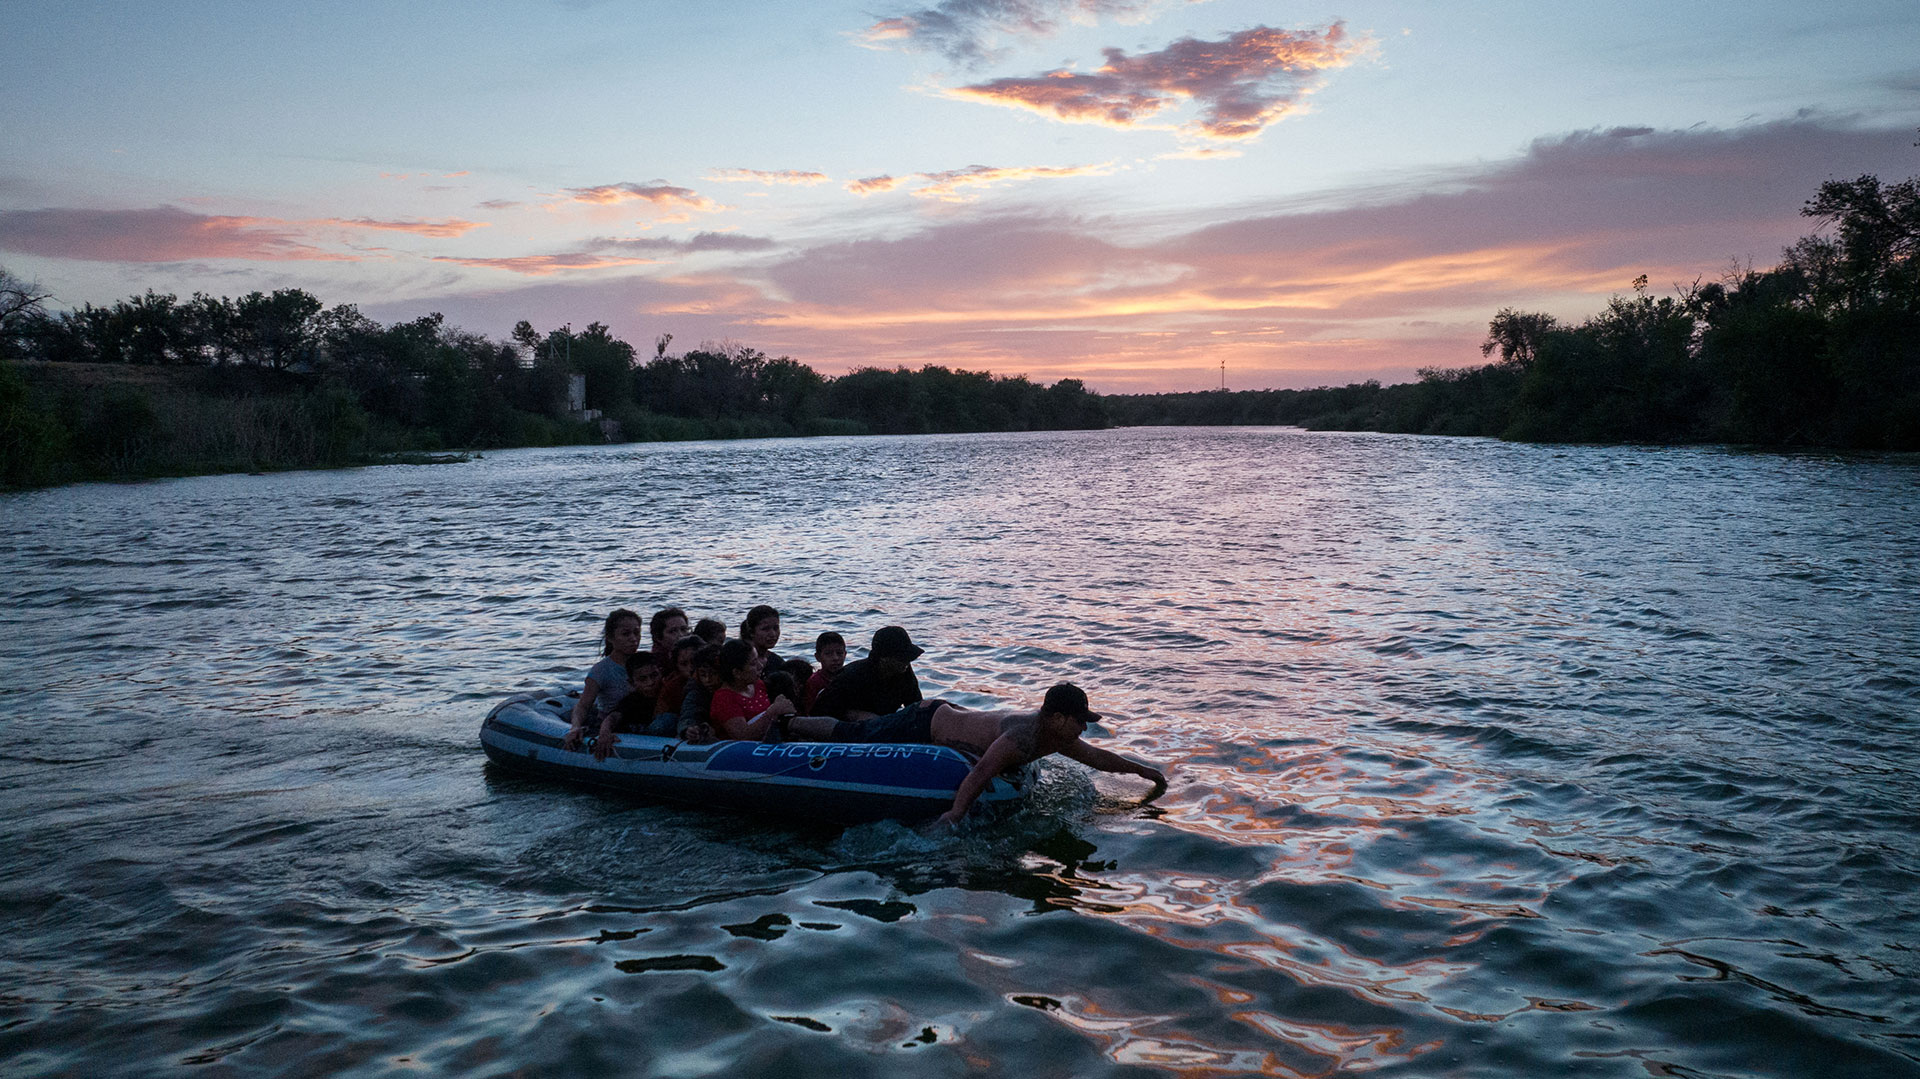 A smuggler uses his hands to paddle on a raft full of asylum seeking migrants from Central and South America across the Rio Grande river into the United States from Mexico in Roma, Texas, June 13, 2022. Picture taken June 13, 2022. Picture taken with a drone. REUTERS/Adrees Latif